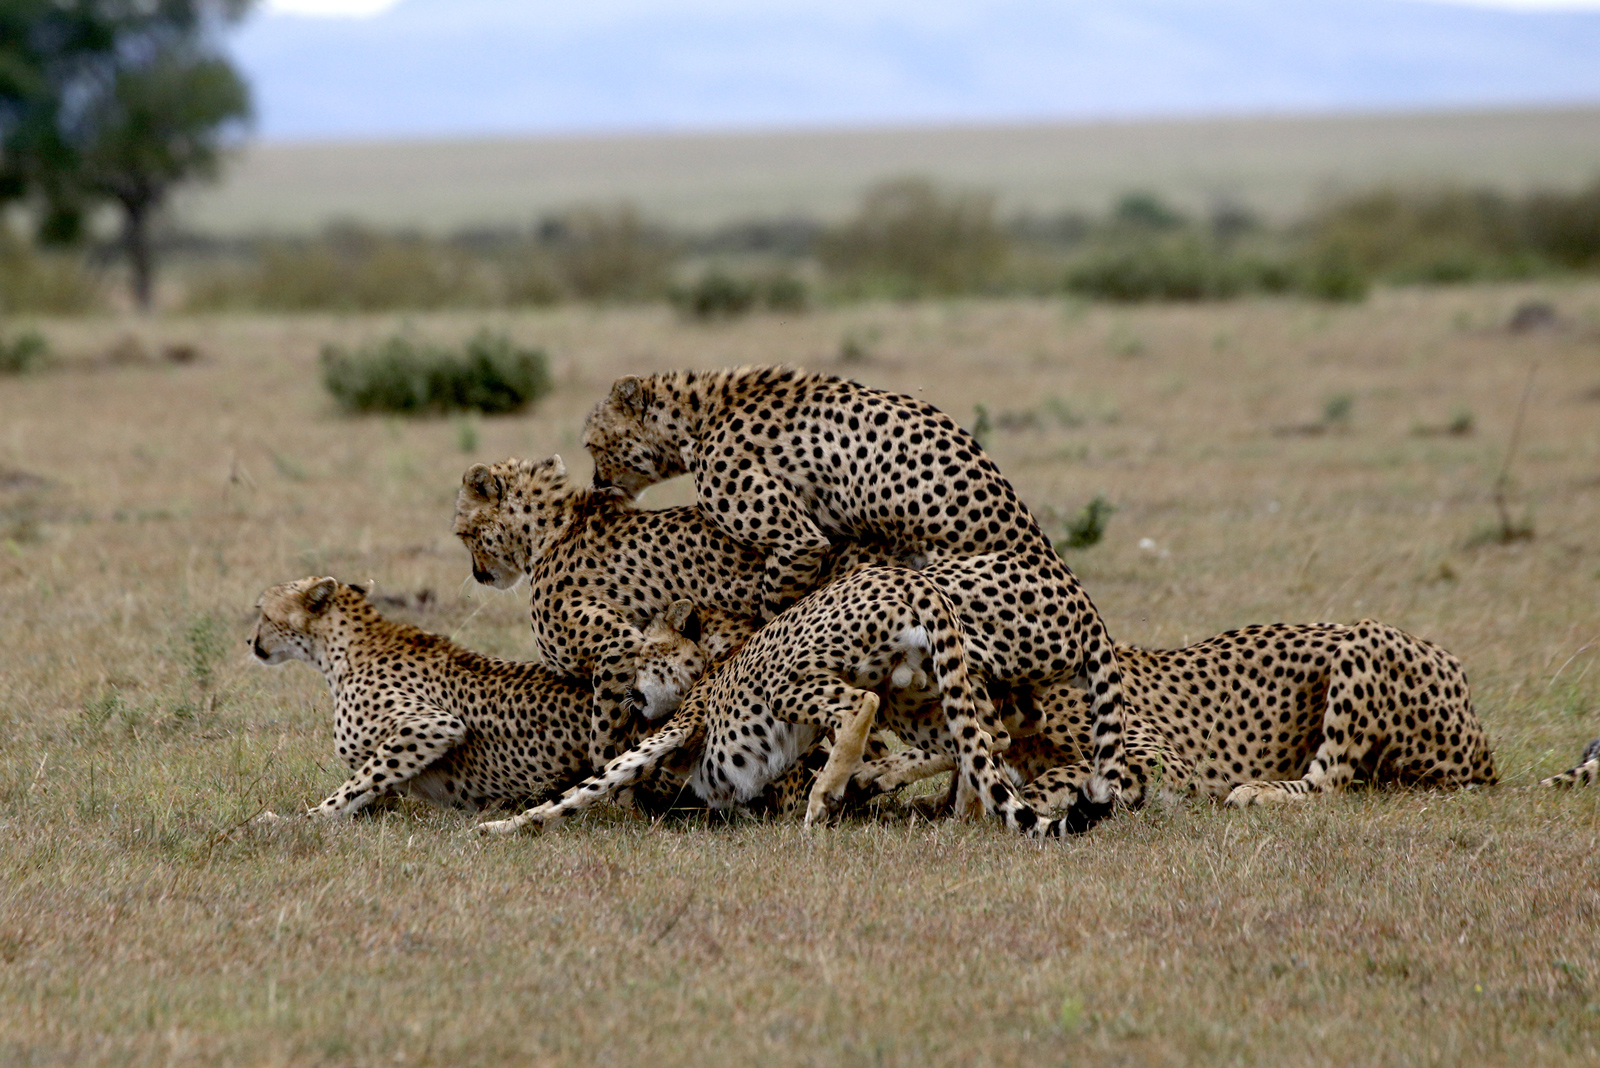 Four of the Fast Five attempting to mate with a female cheetah in the Maasai Mara © Elena Chelysheva